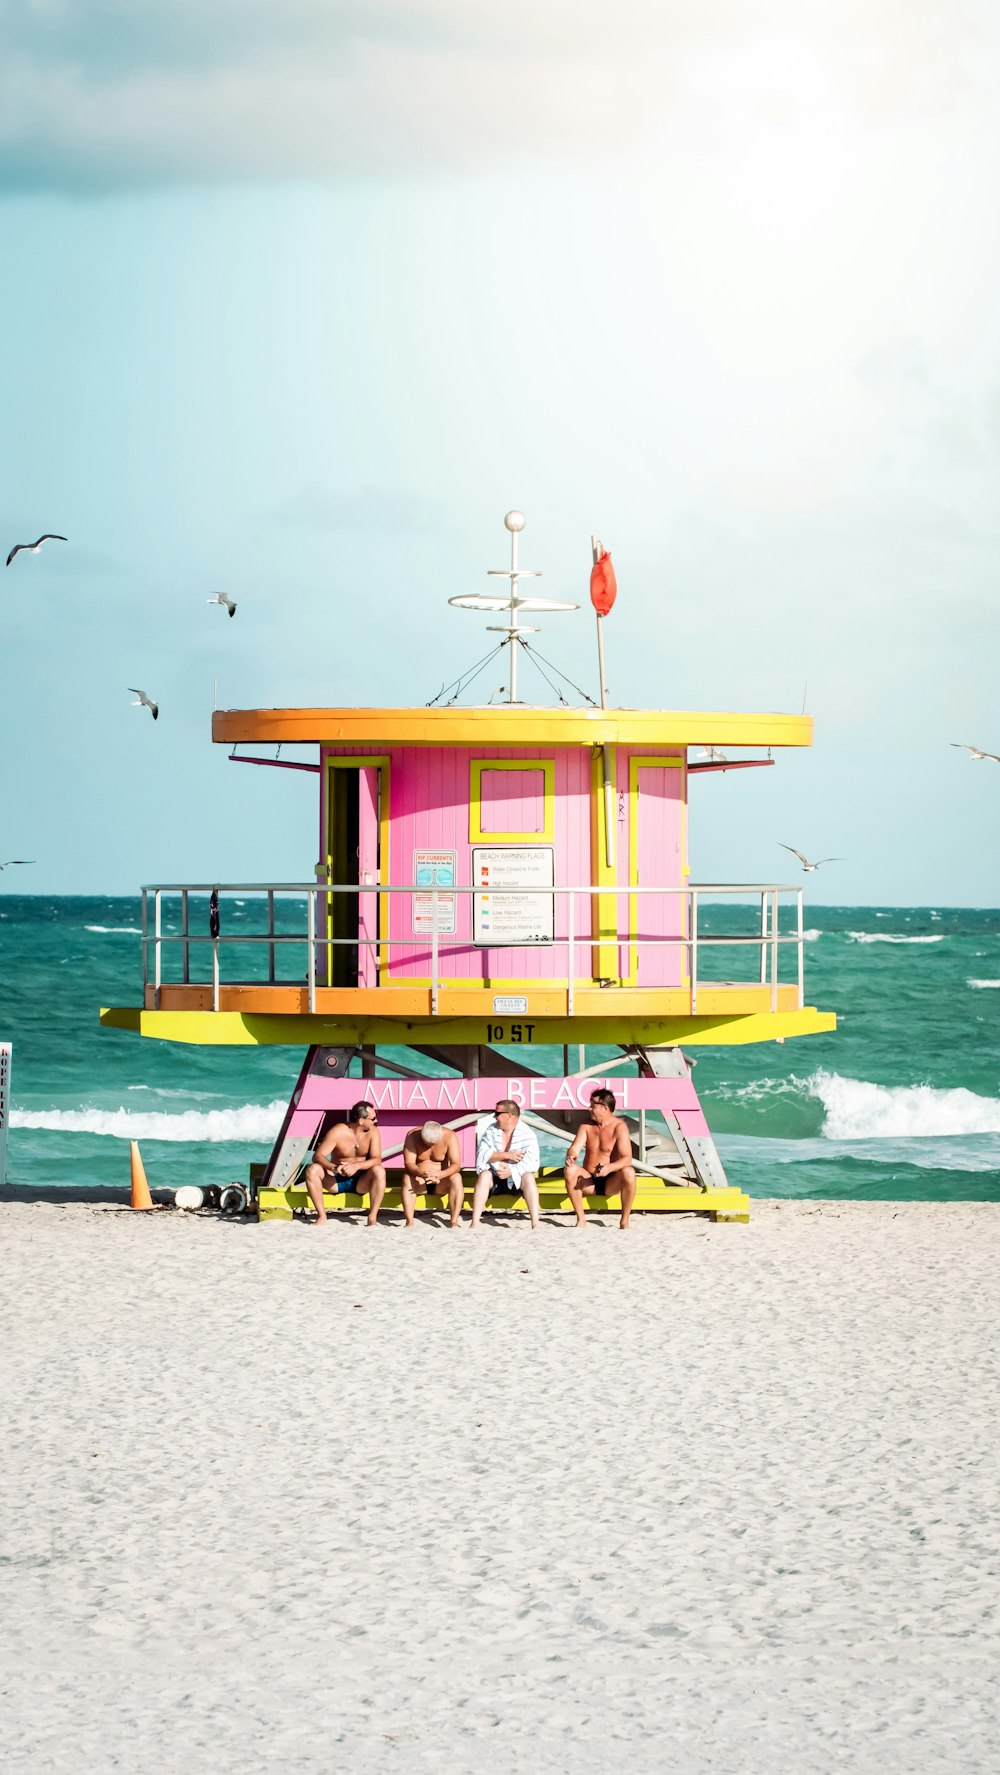 pink and yellow wooden lifeguard house on beach during daytime